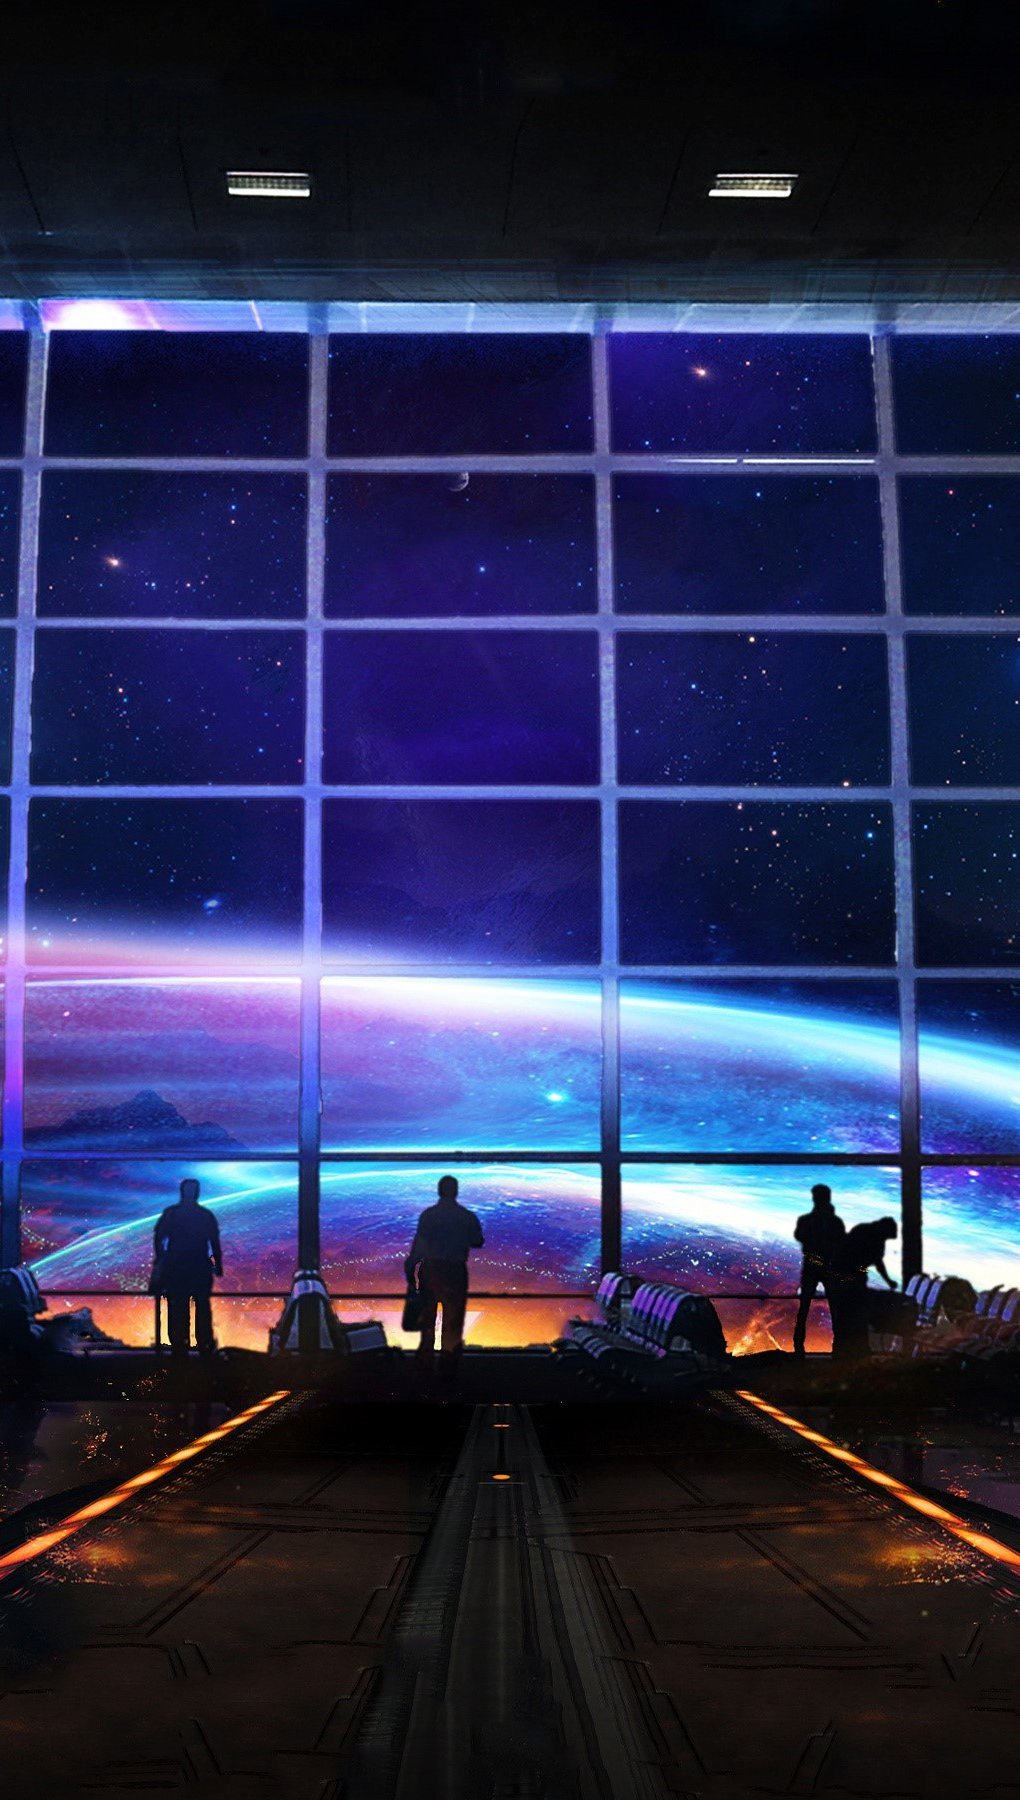 Wallpaper View to space Vertical